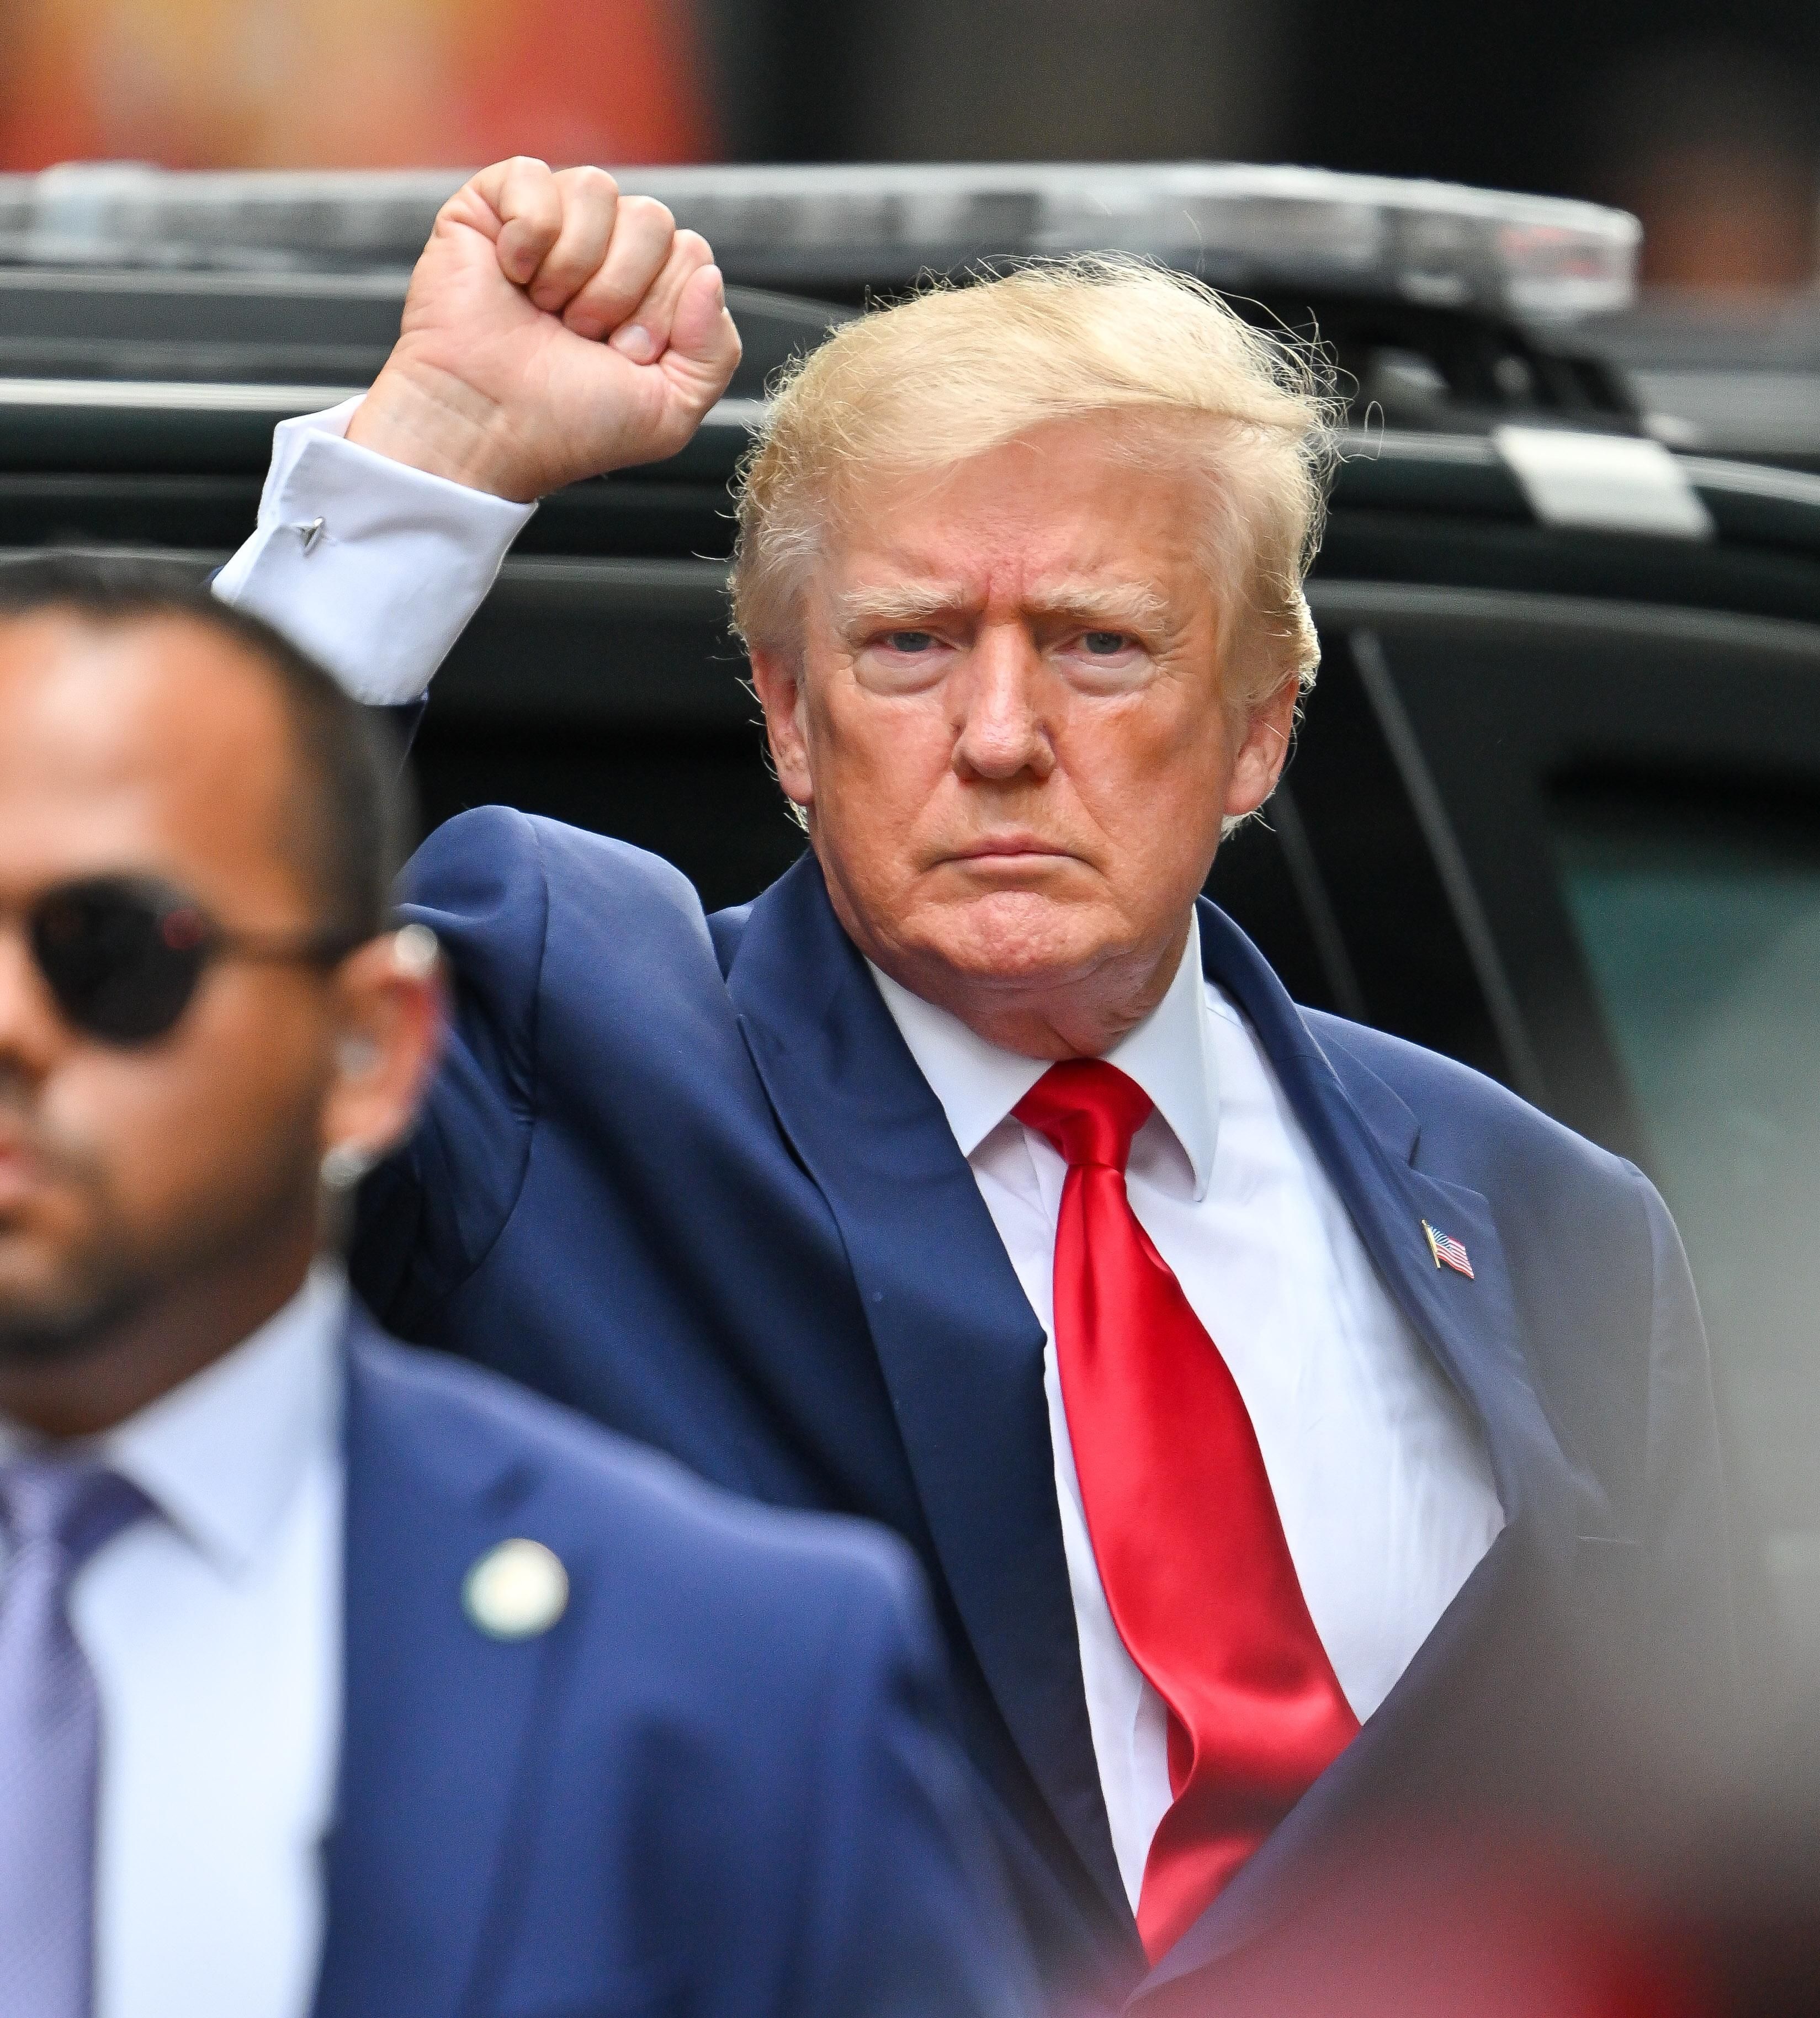 Former U.S. President Donald Trump leaves Trump Tower on August 10, 2022 in New York City.